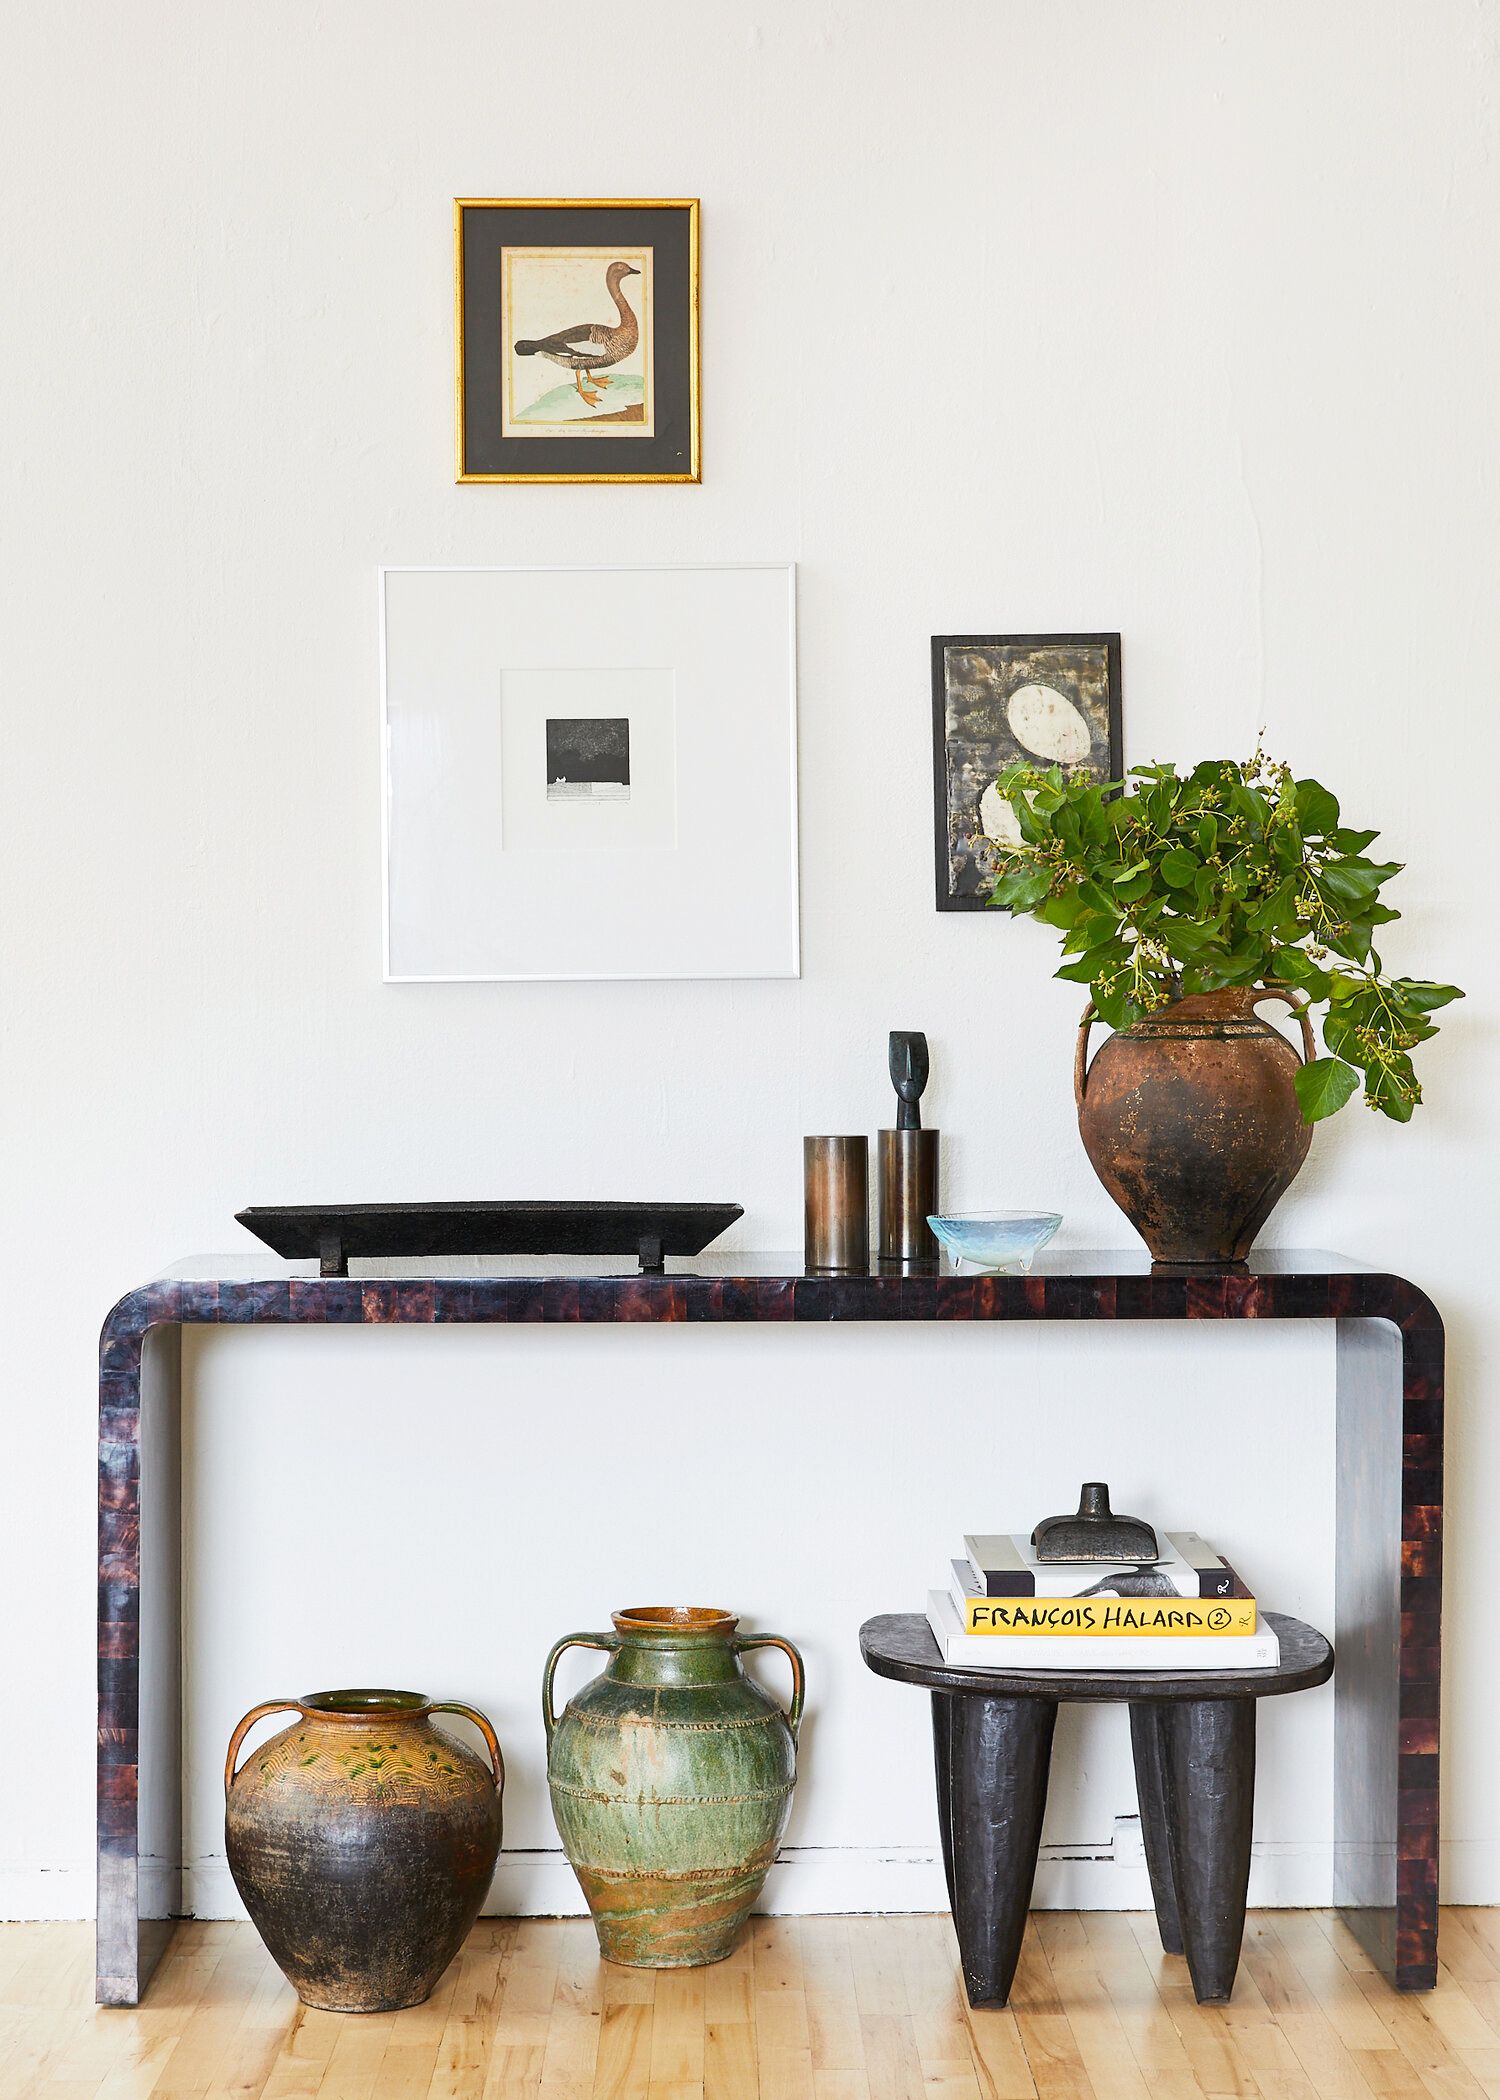 tenga en cuenta hélice persuadir 19 Console Table Decorating Ideas for Every Room In the House